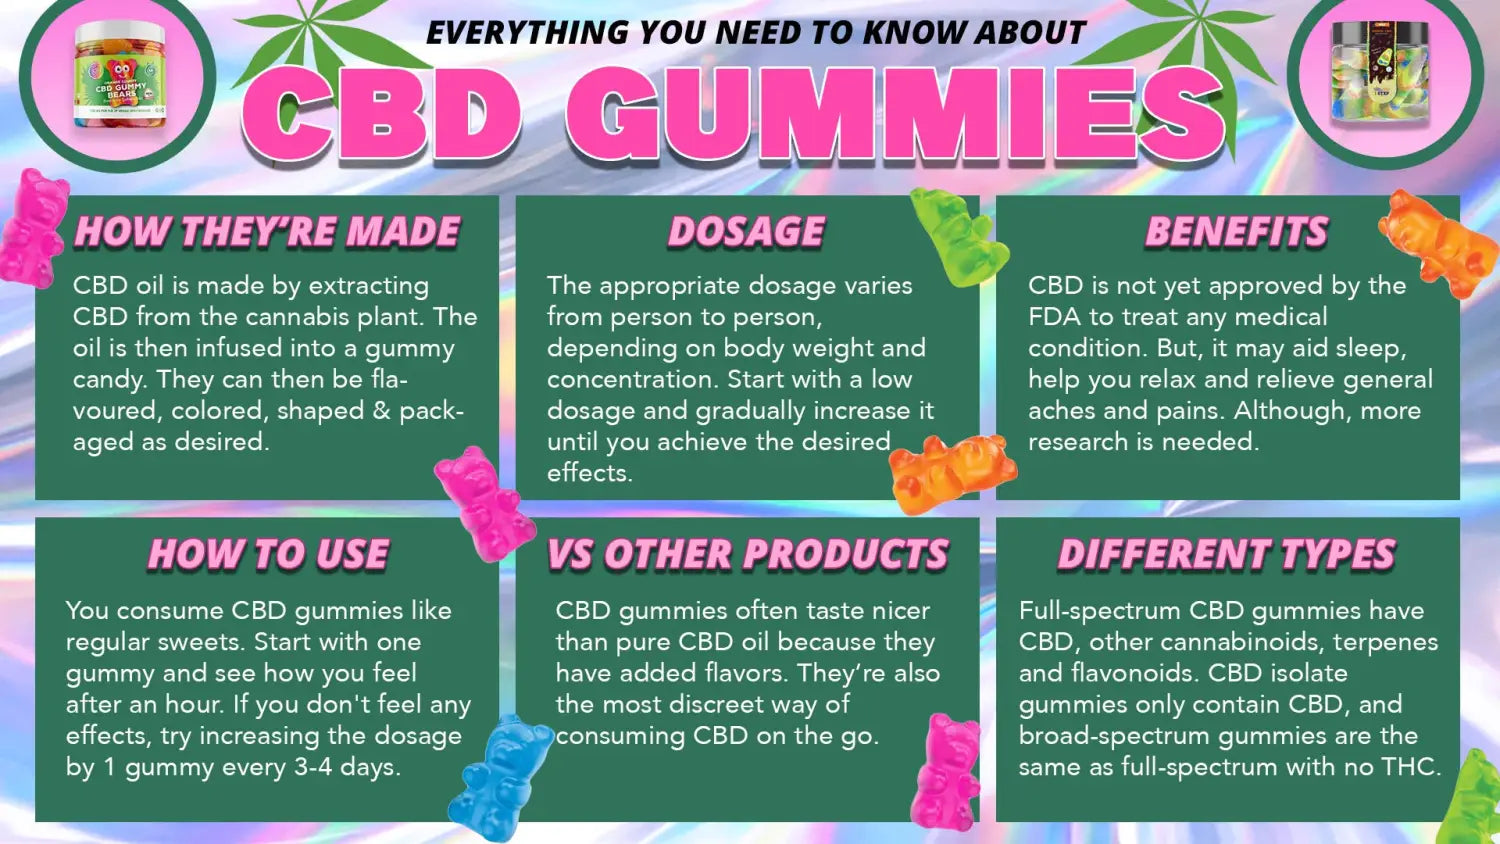 What Can A First-Time User Expect From CBD Gummies?